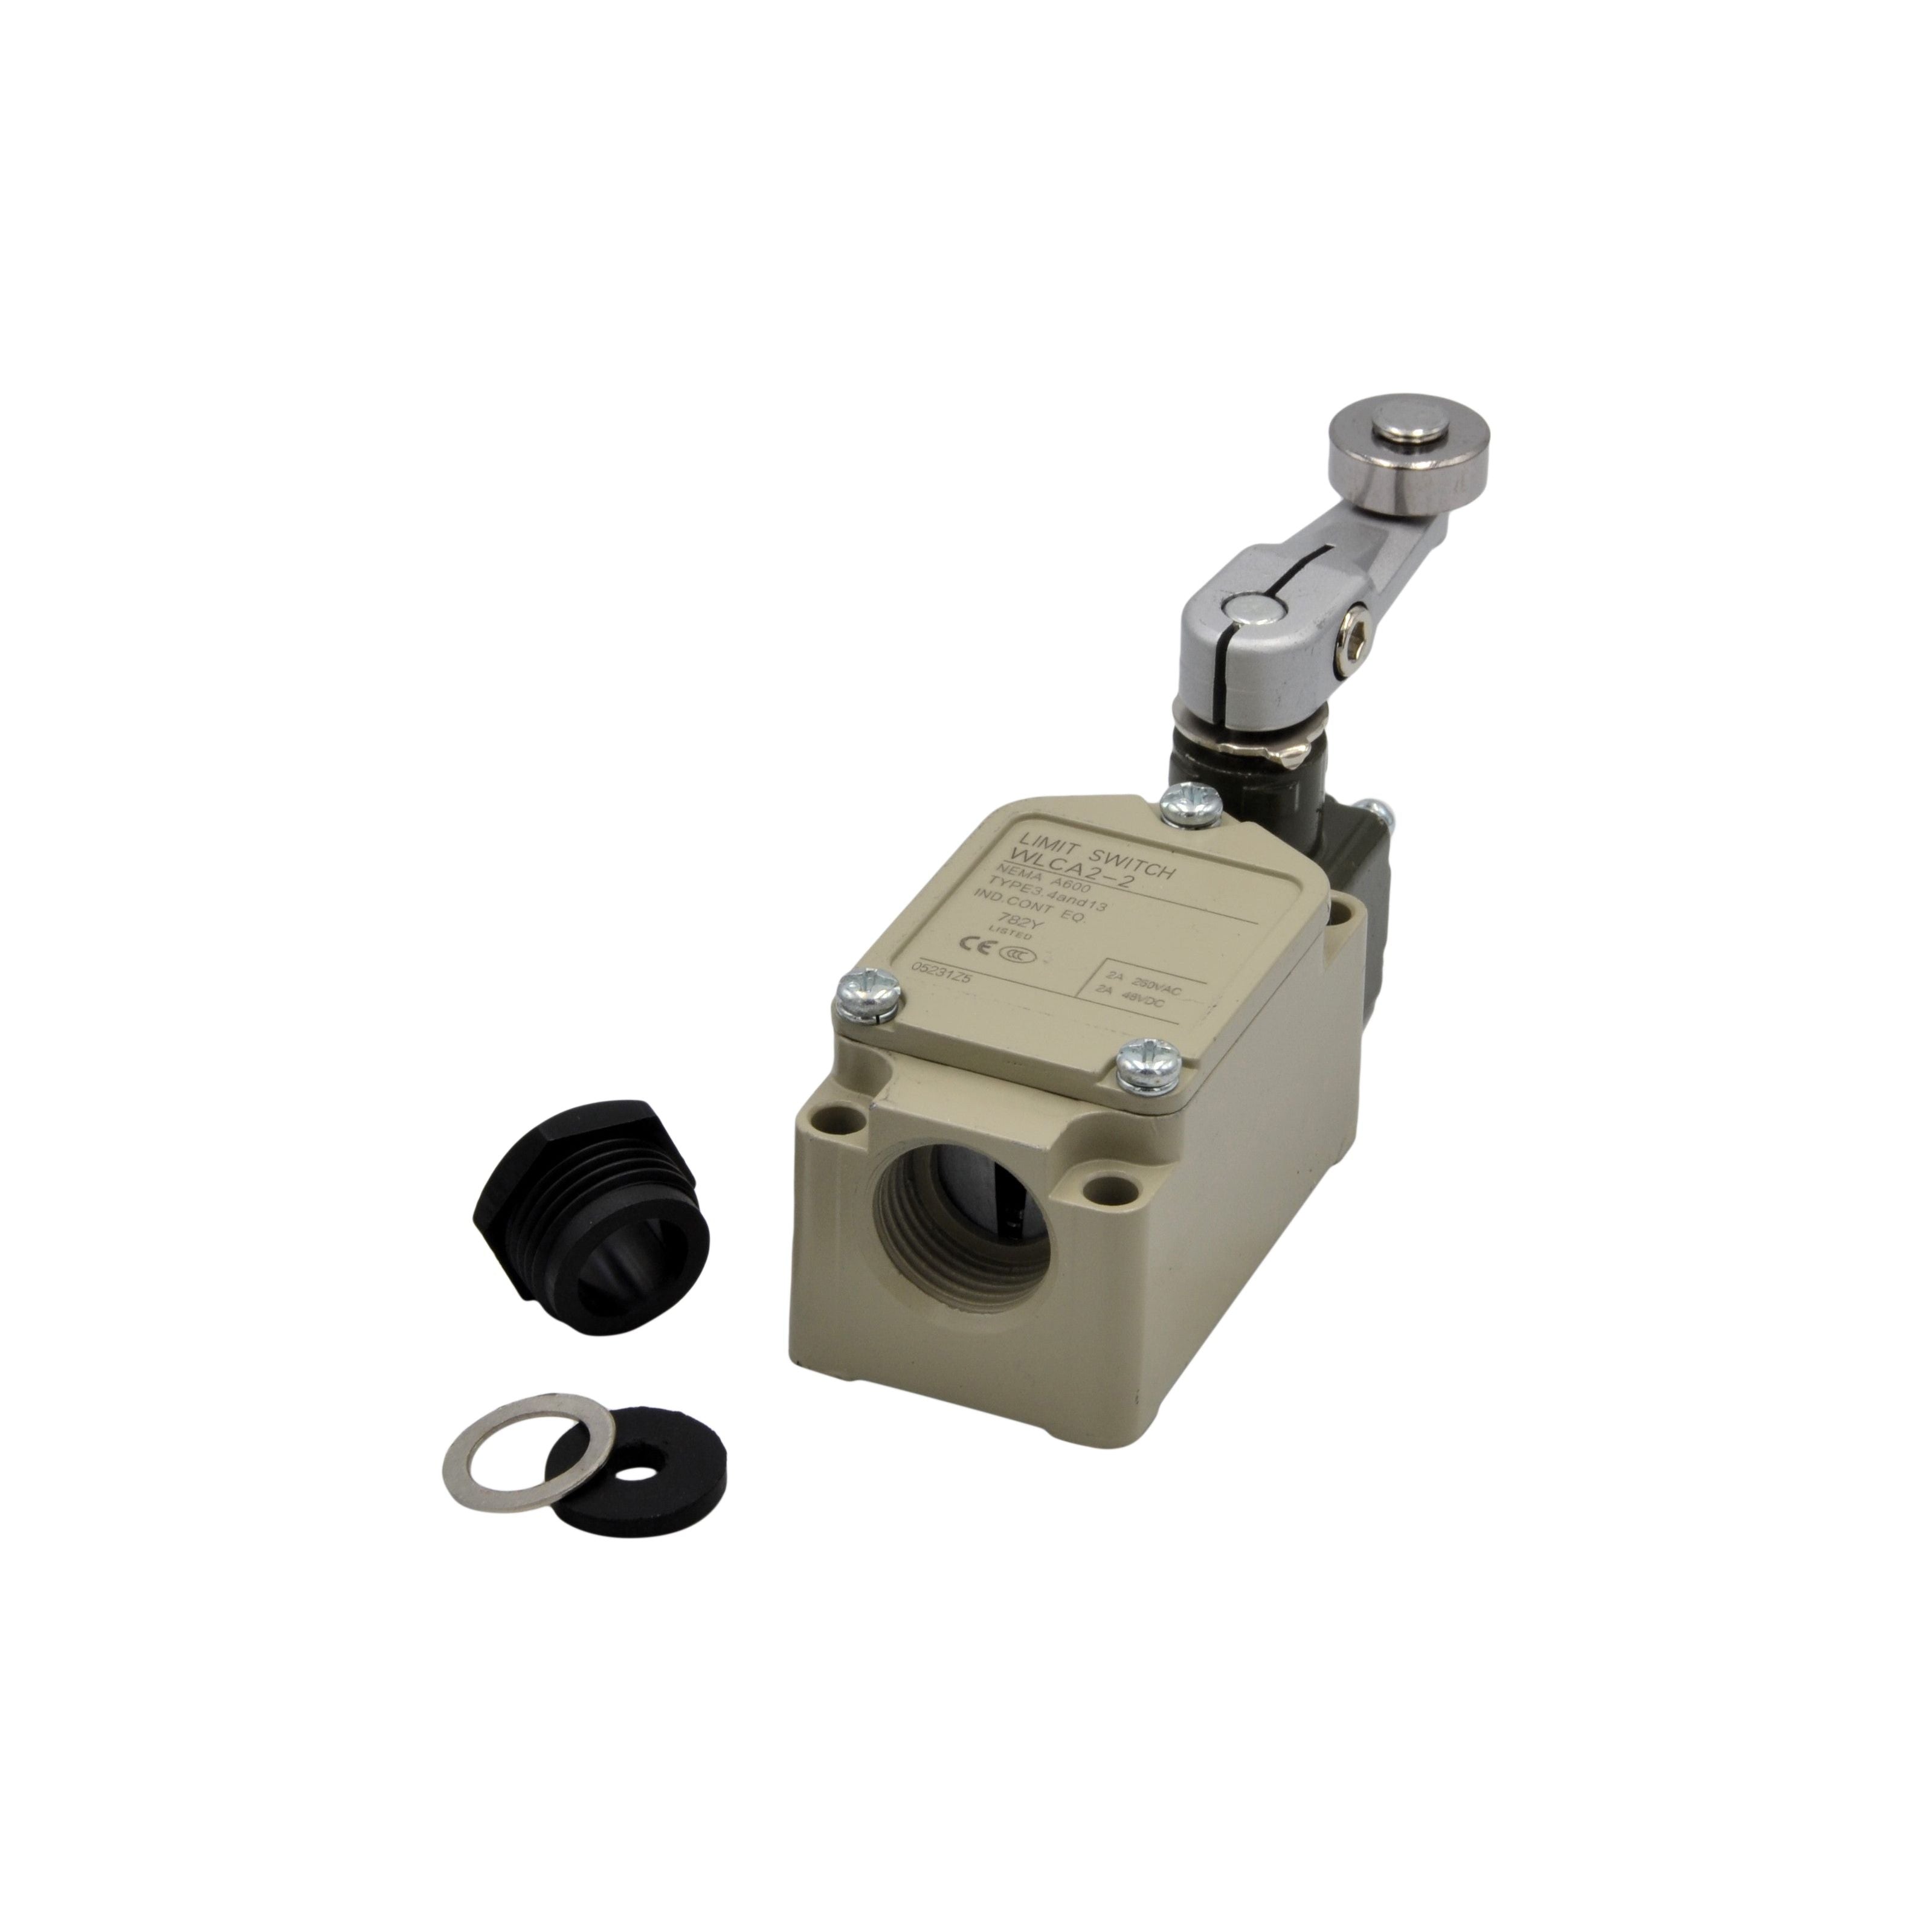 WLCA2-2 Micro Limit Switch with Adjustable Lever Roller Arm